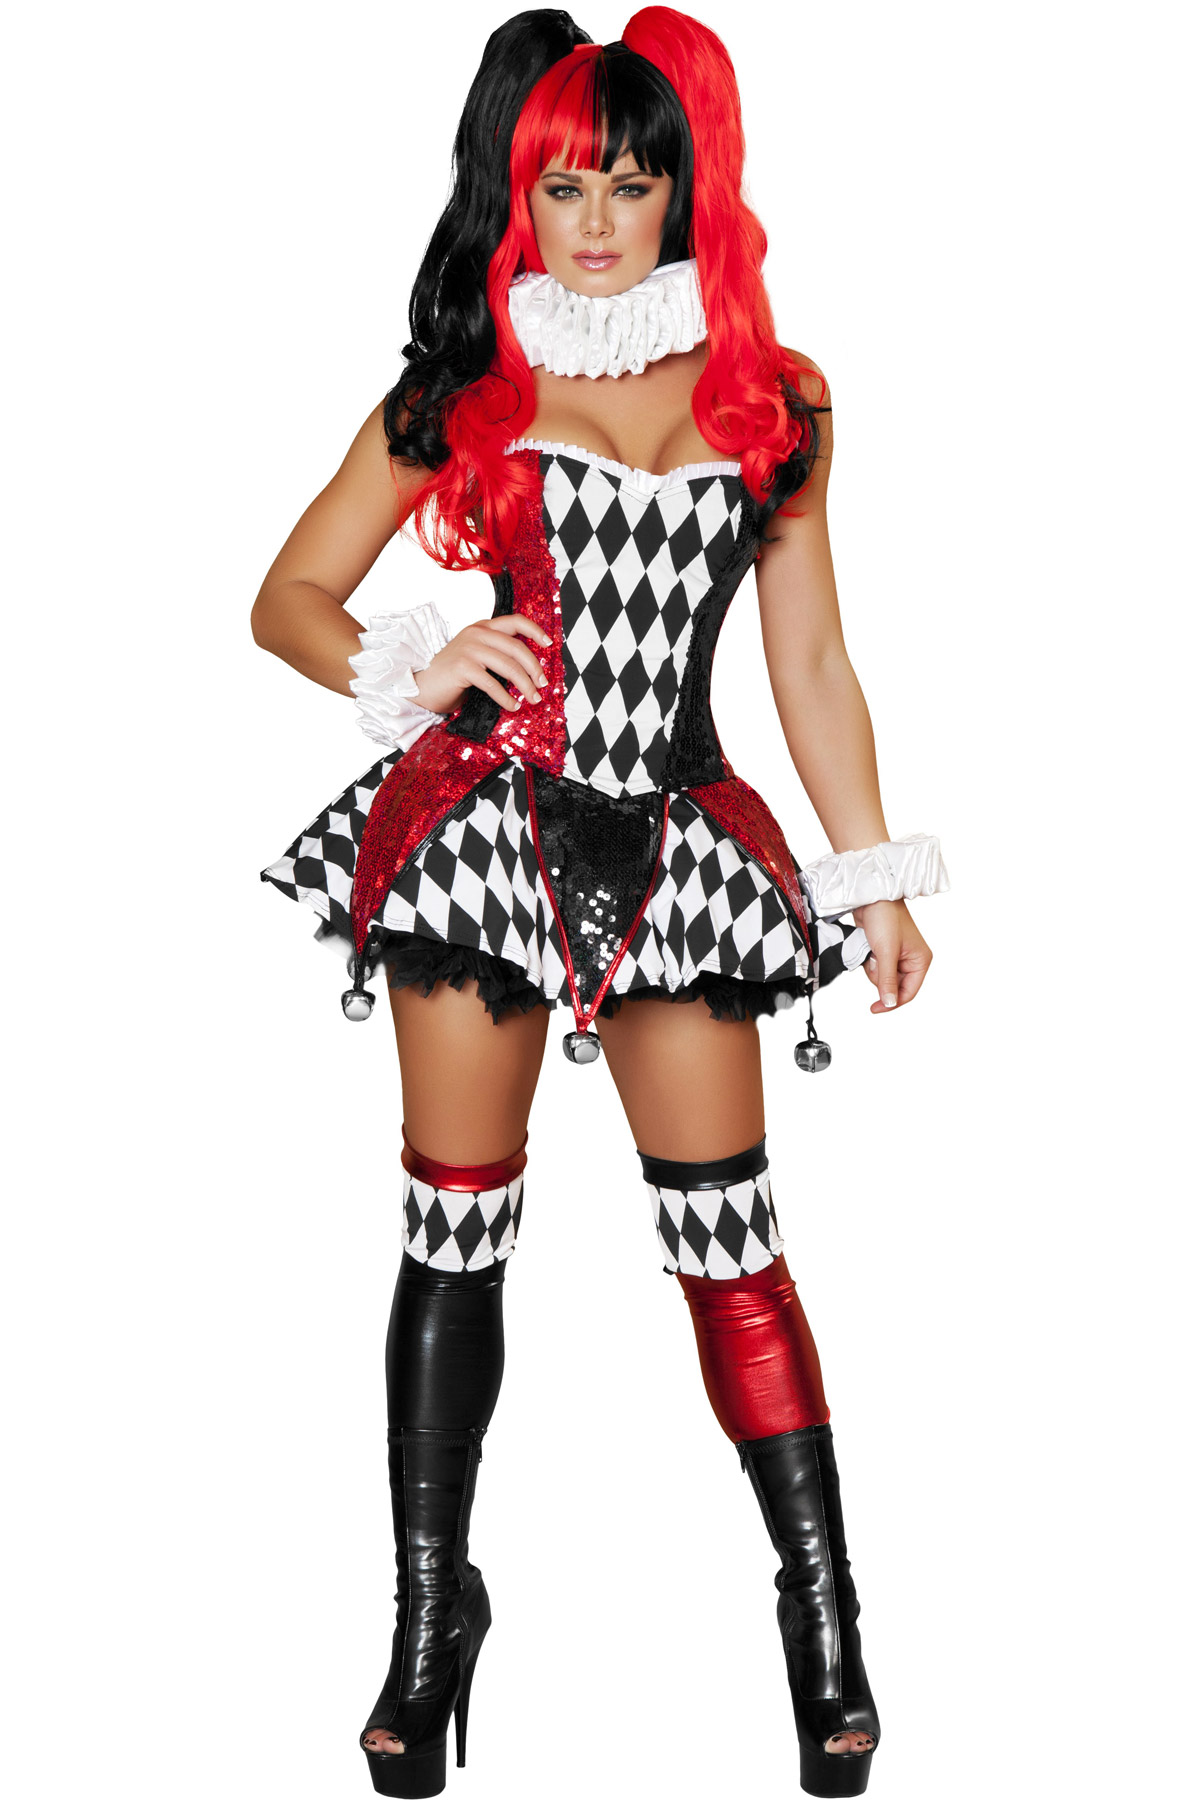 Sexy Adult Women Court Jester Cutie Clown Harlequin Costume Halloween Outfit  New | eBay